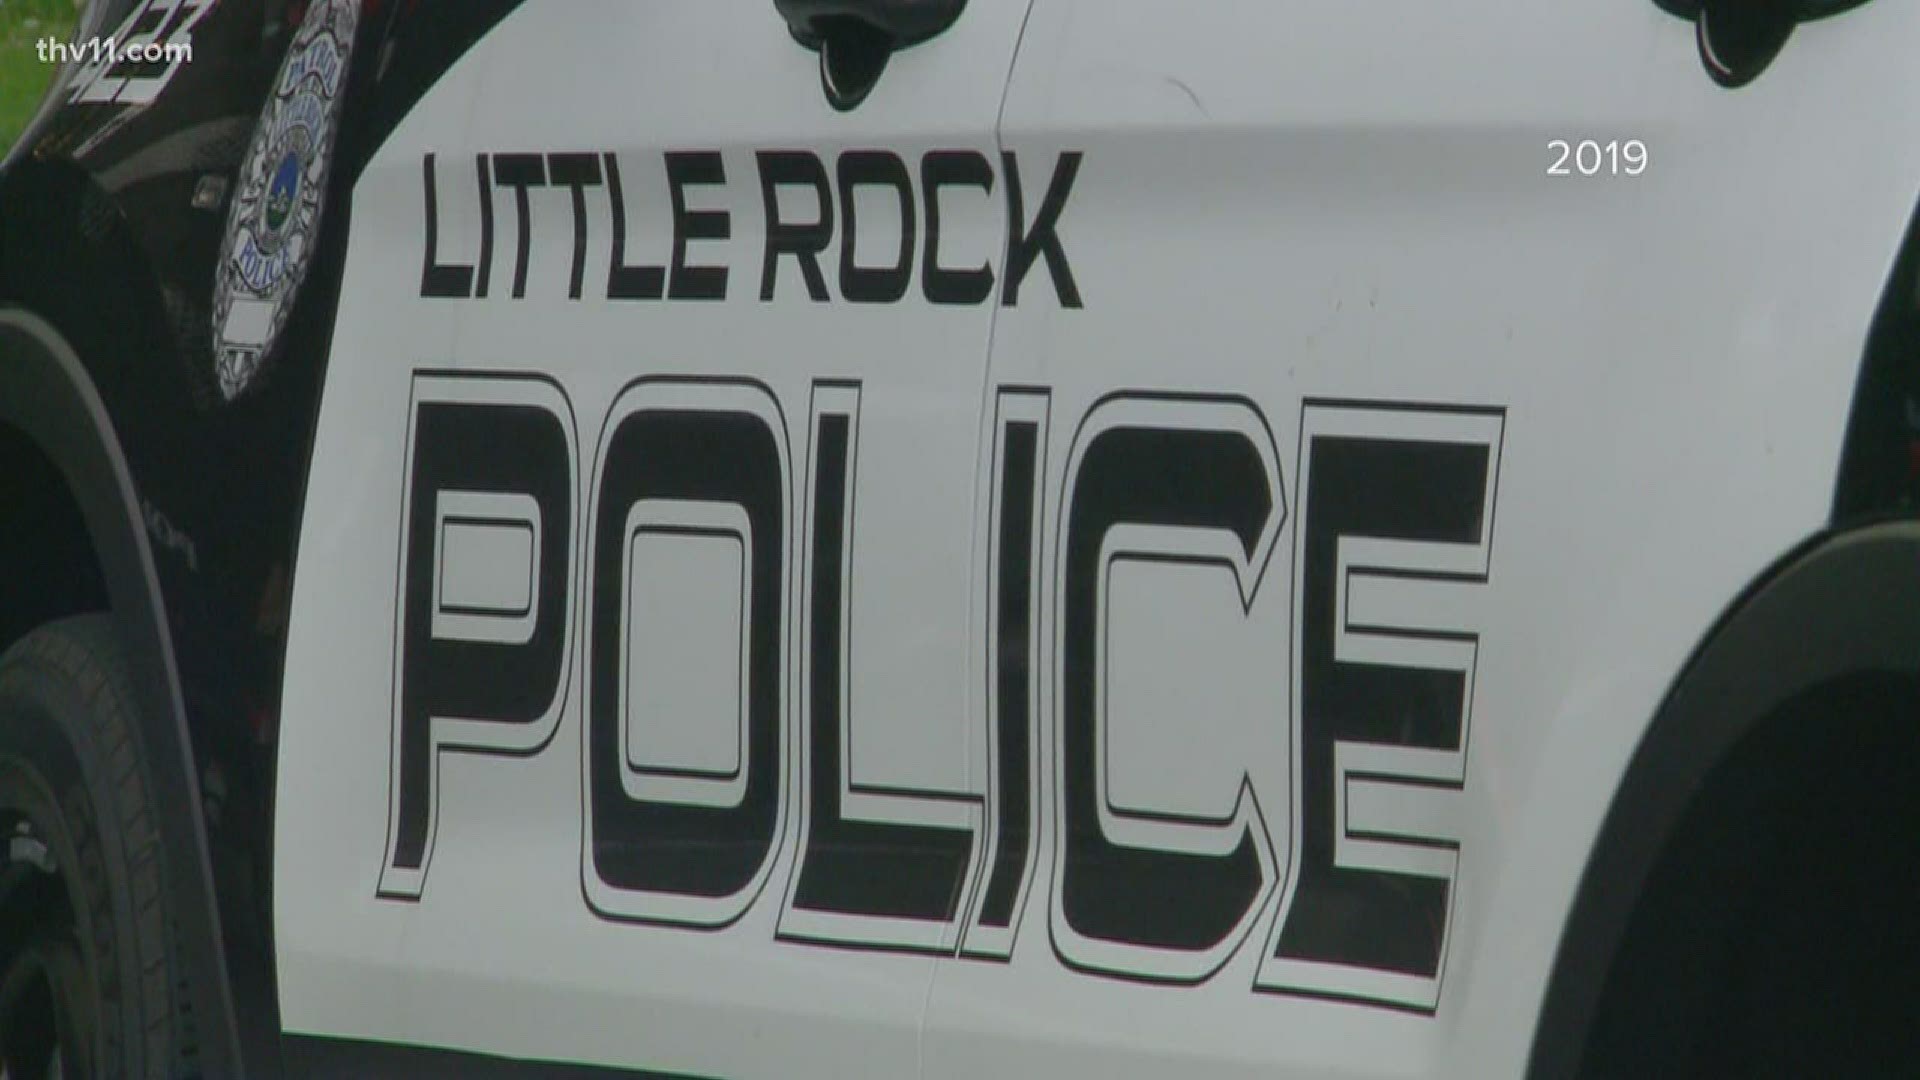 Amid lawsuits and distrust up and down the ranks, Mayor Frank Scott wants an independent review of the Little Rock Police Department.